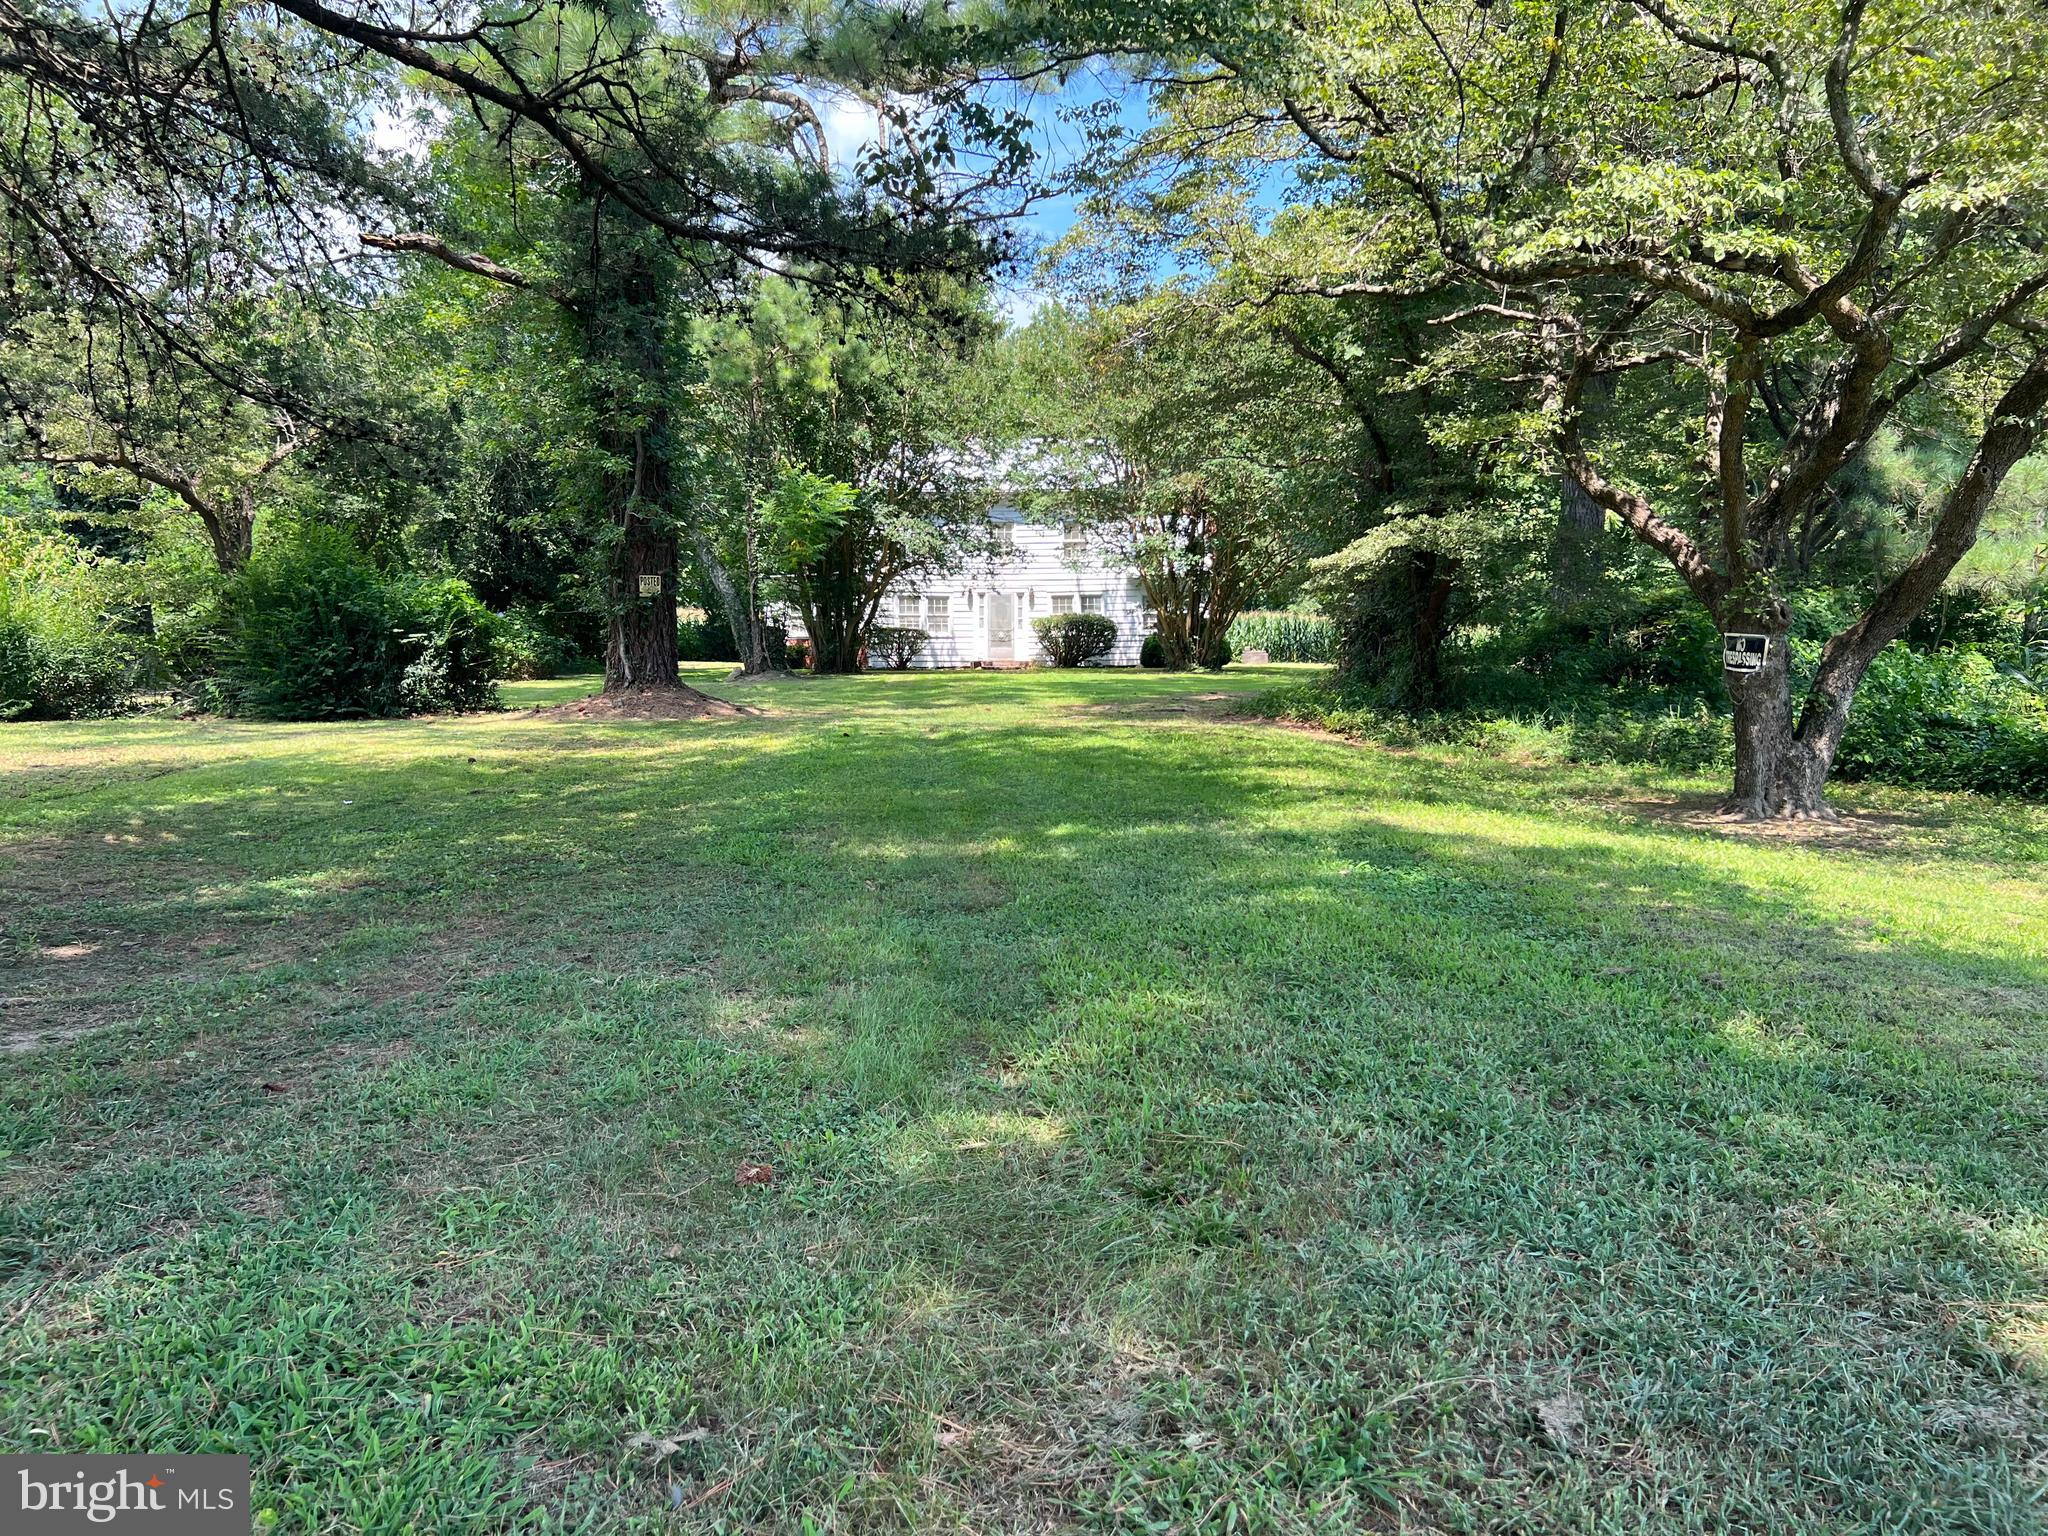 Incredible opportunity to own 11.8 acres of farm land in Reedville, Virginia close to the Chesapeake Bay and all things water!  The land is currently farmed, existing house is being sold as is and needs work. It was built in 1920 but has great potential! Beautiful setting, excellent location!